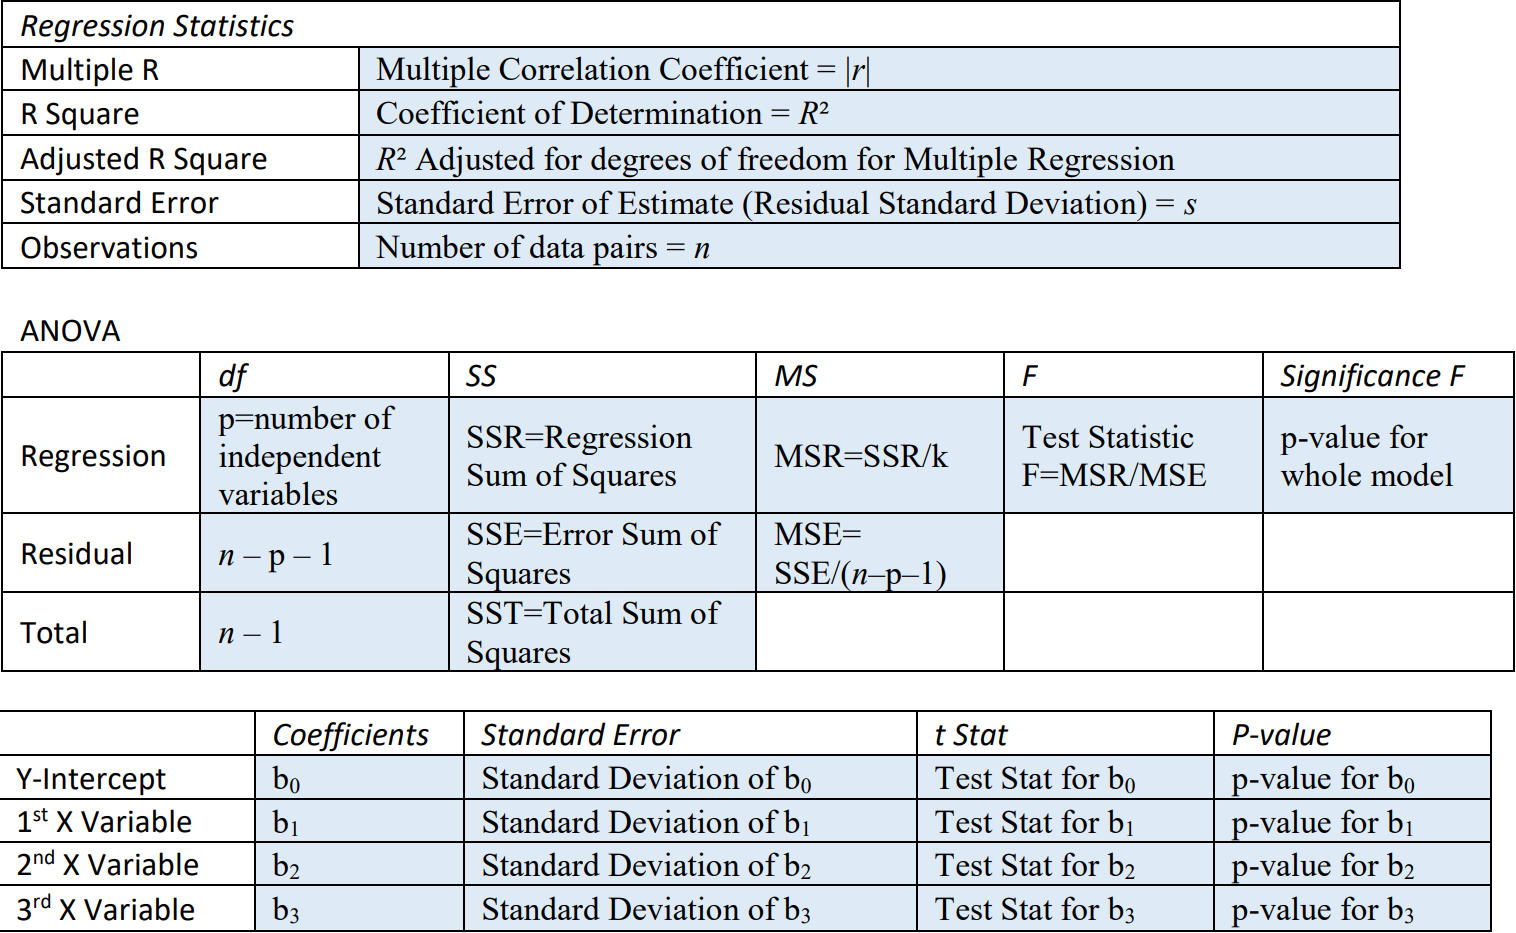 Excel-generated regression statistics table, ANOVA table, and table of coefficients, standard error, t-stat and p-value for the y-intercept, first x variable, second x variable, and third x variable.